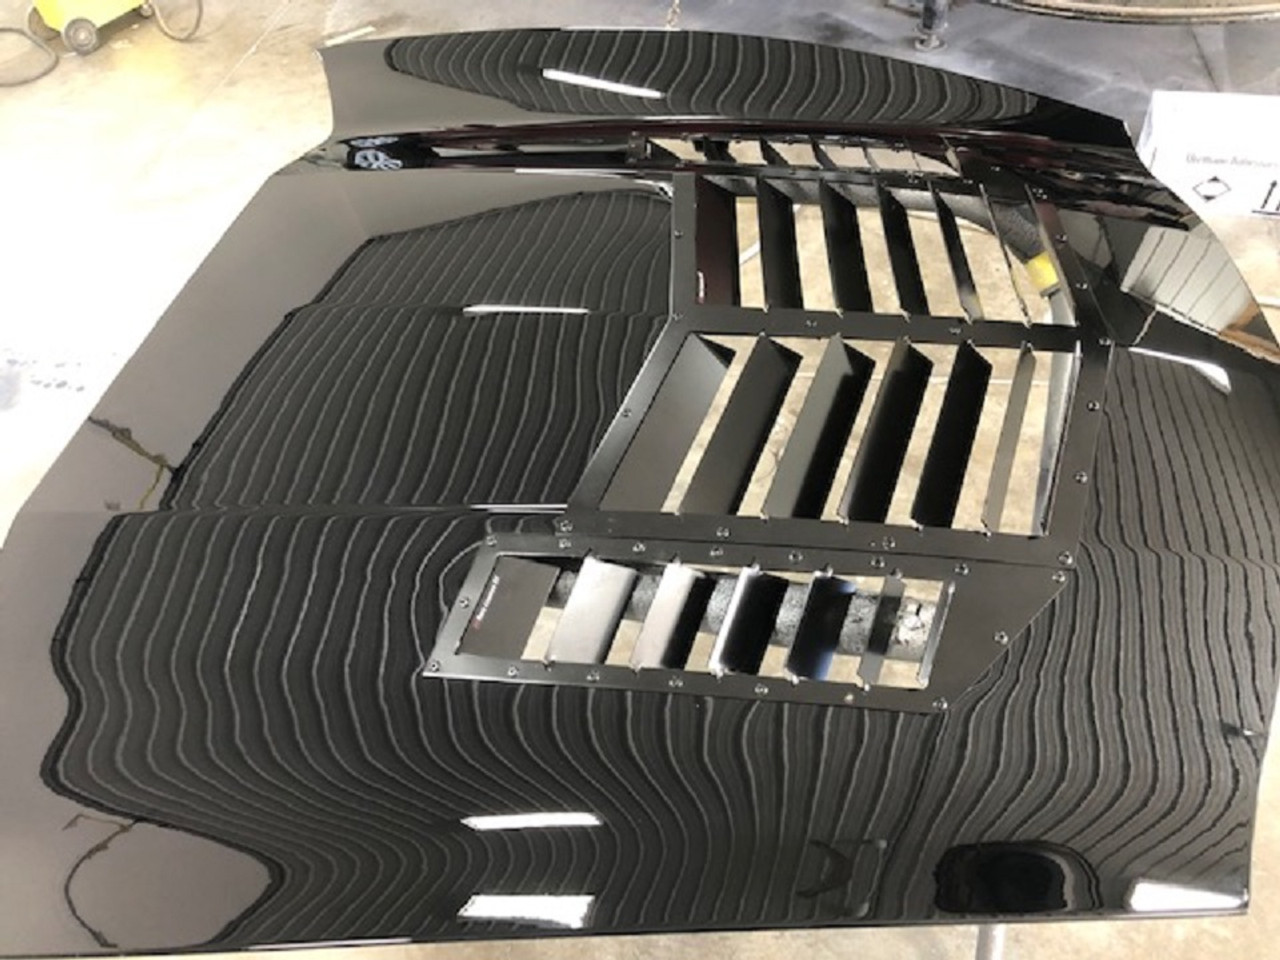 Race Louver C7 Corvette RT Track Trim center car hood extractor is designed for street, high performance driving and track duty